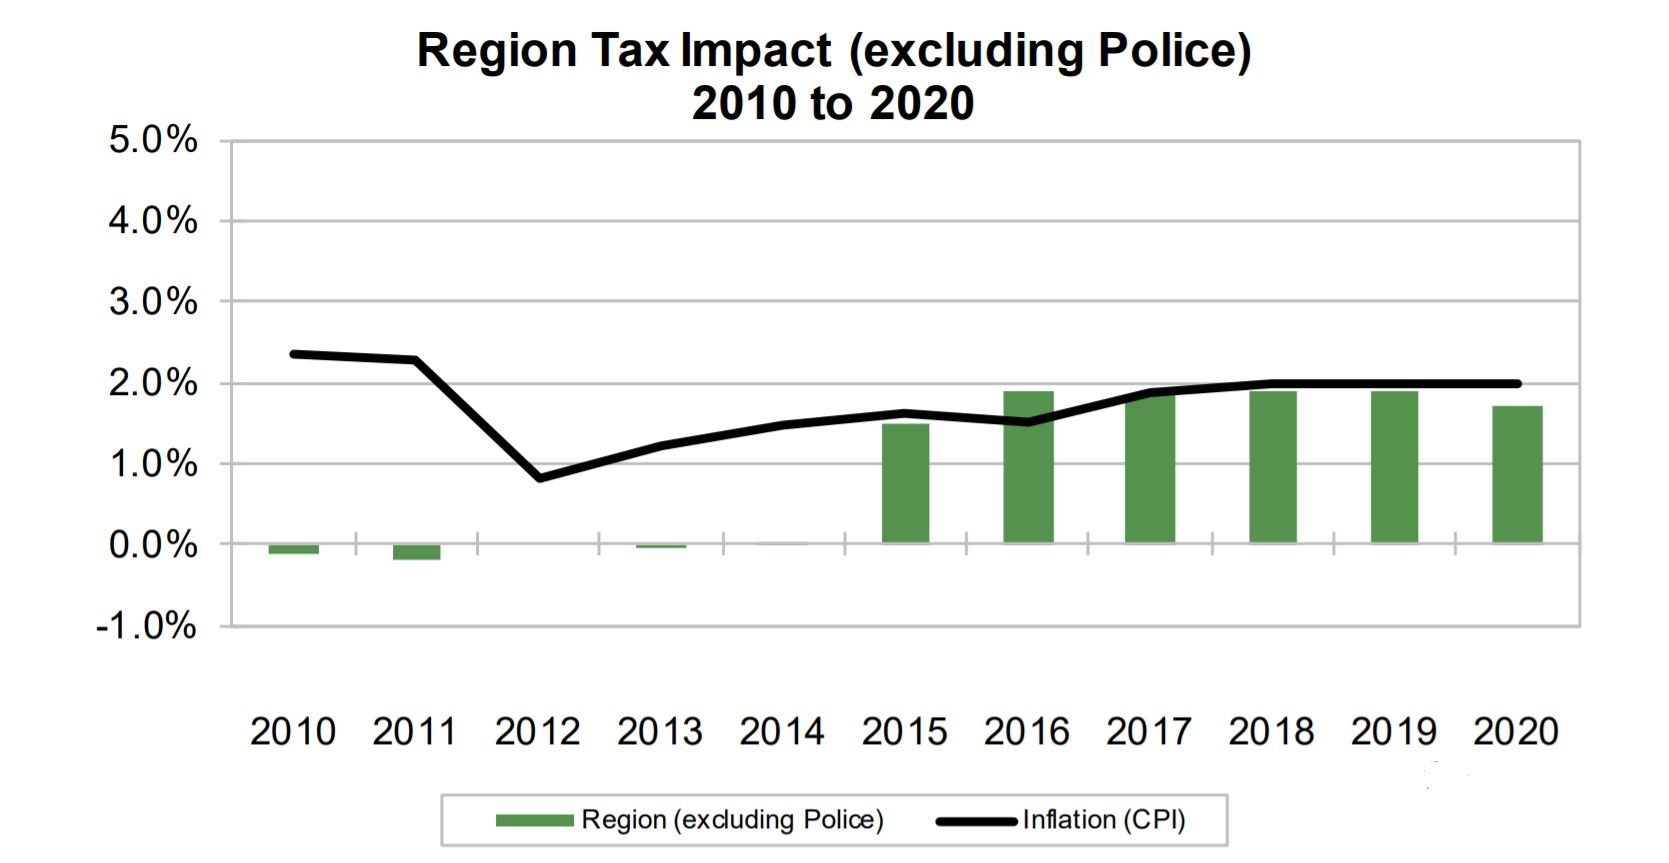 bar and line graph showing Region Tax Impact (excluding Police) from 2010 to 2020